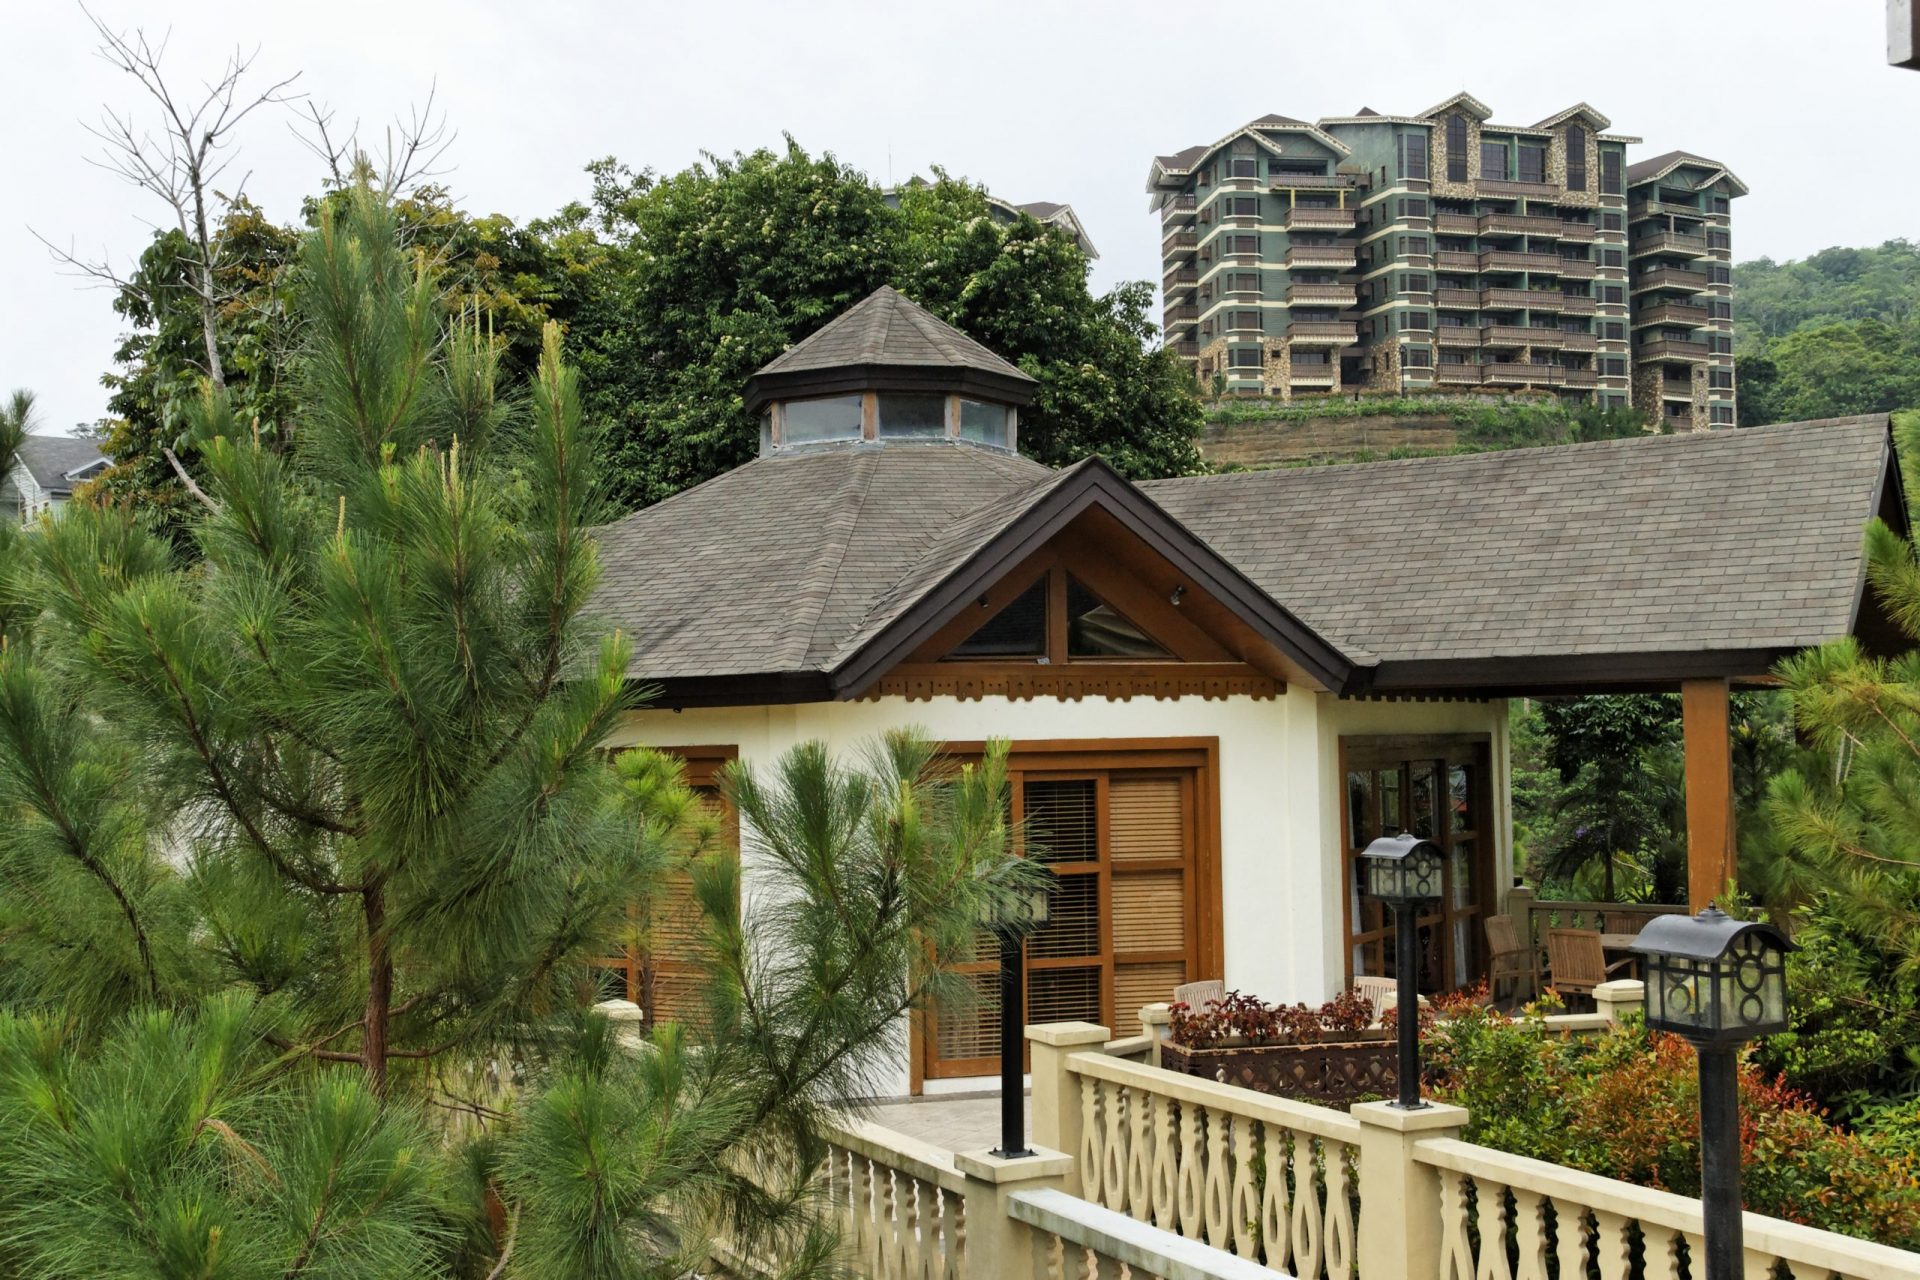 Brittany's Swiss-inspired Community in Tagaytay